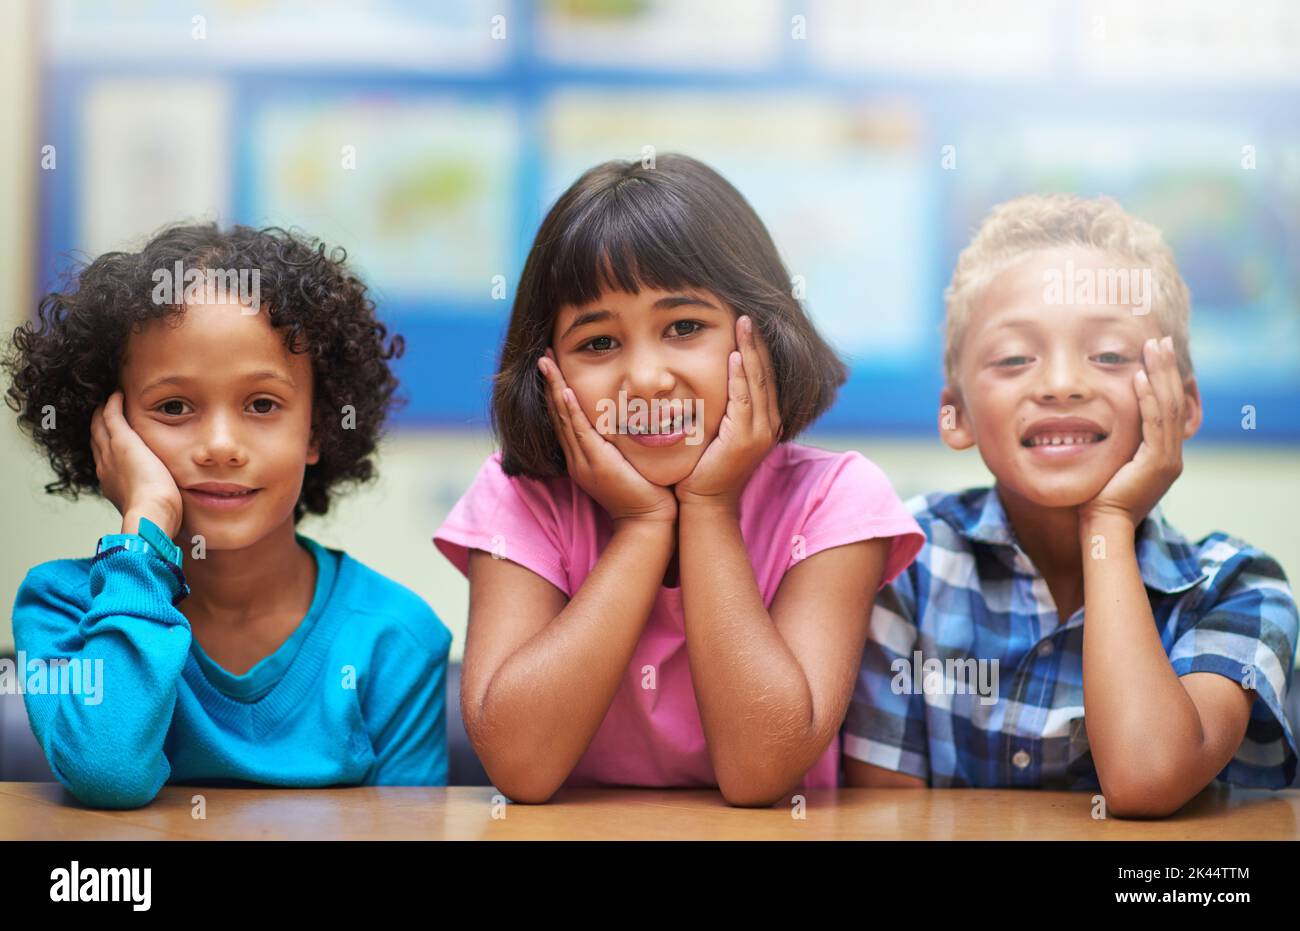 From small beginnings come great things. Portrait of elementary kids at school. Stock Photo